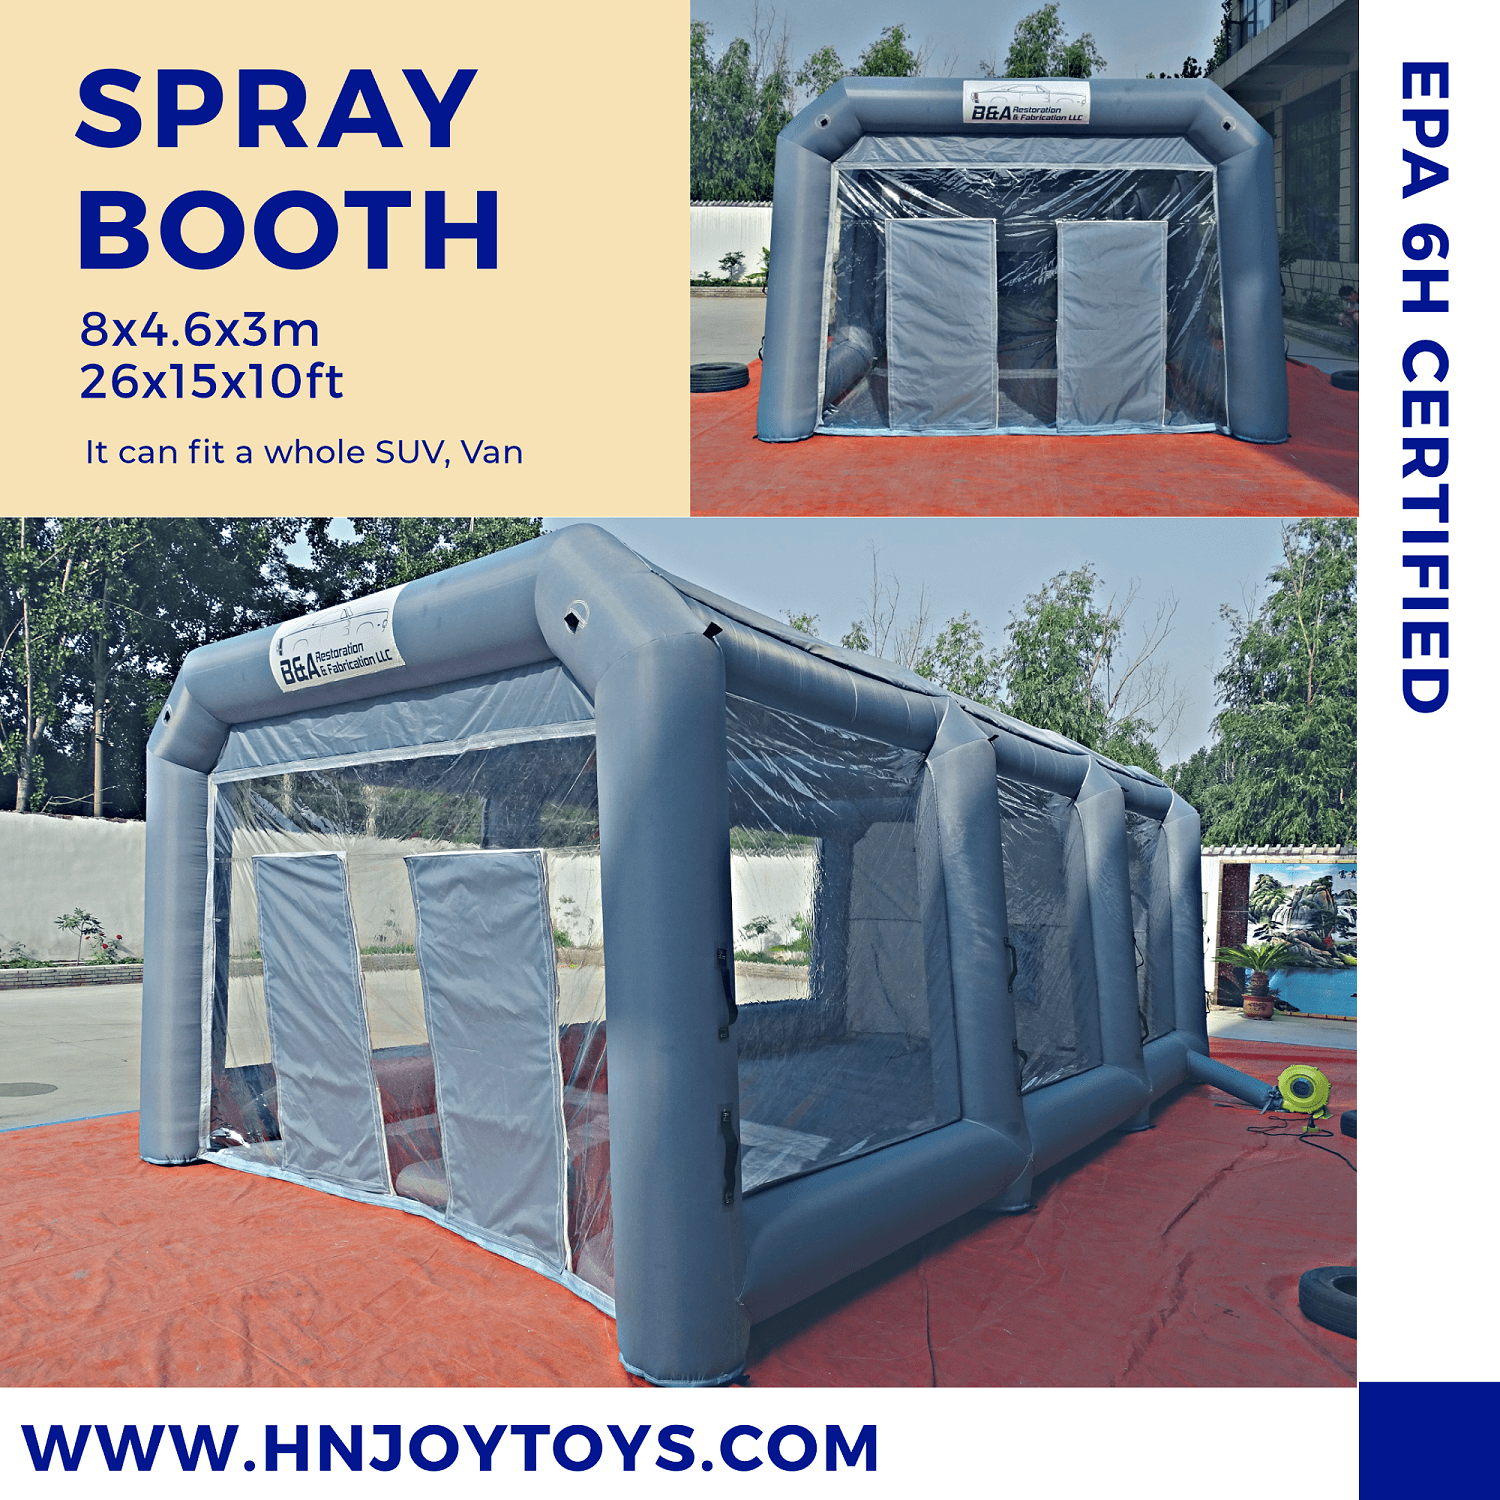 Portable Automotive Spray Booths - Best Solution for Your Spraying